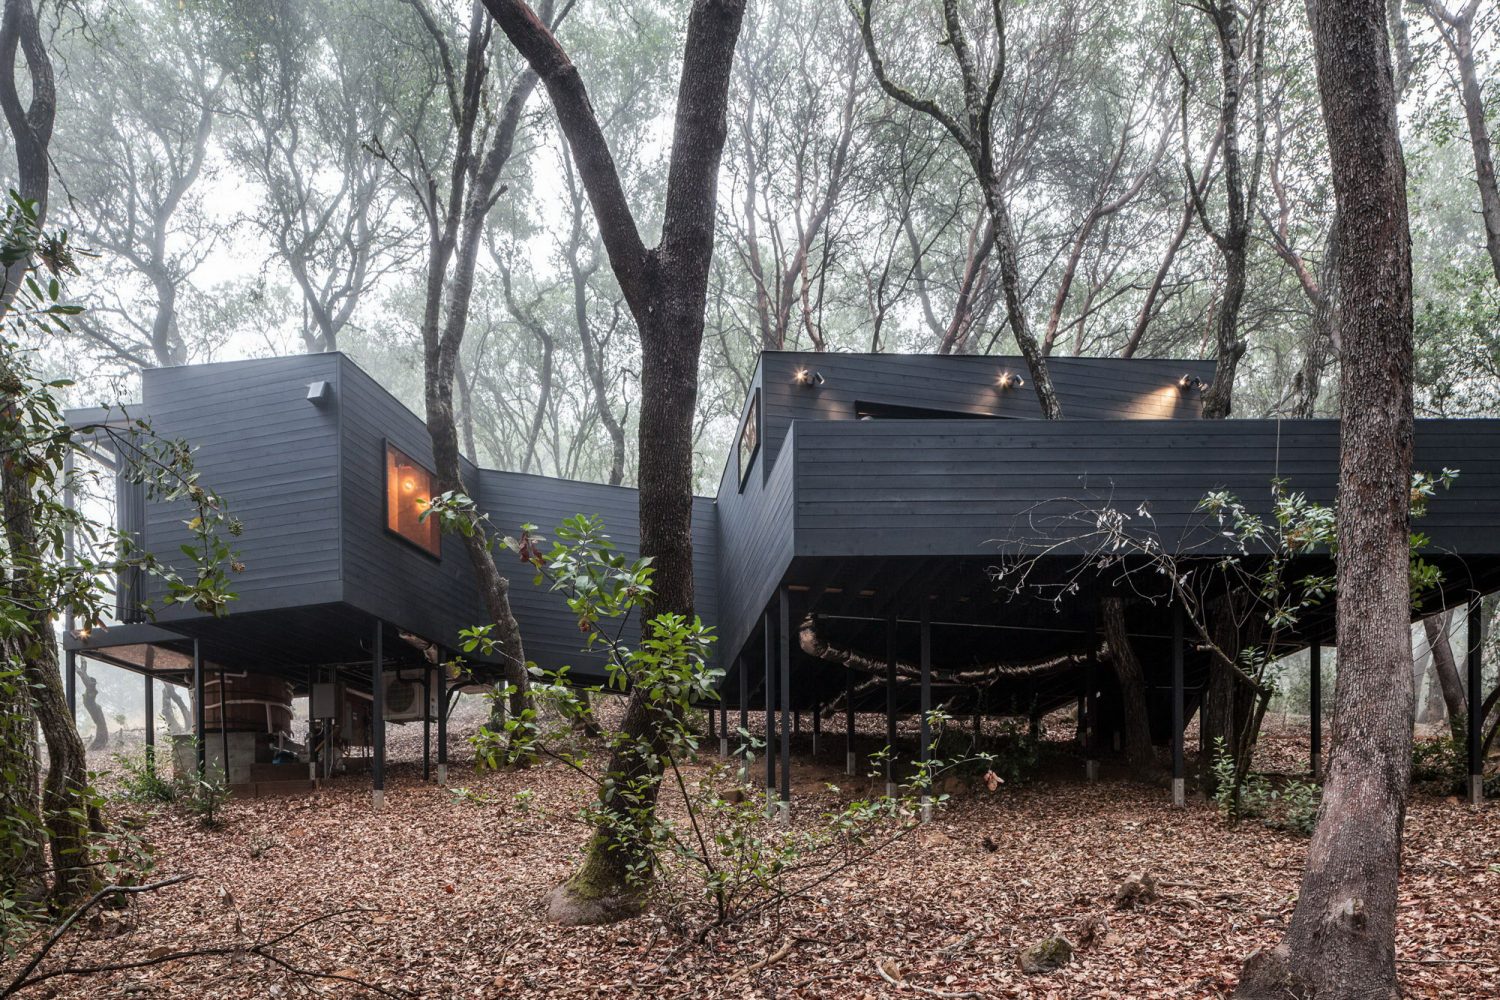 Forest House | Complex of Nine One-Room Cabins by Envelope A+D